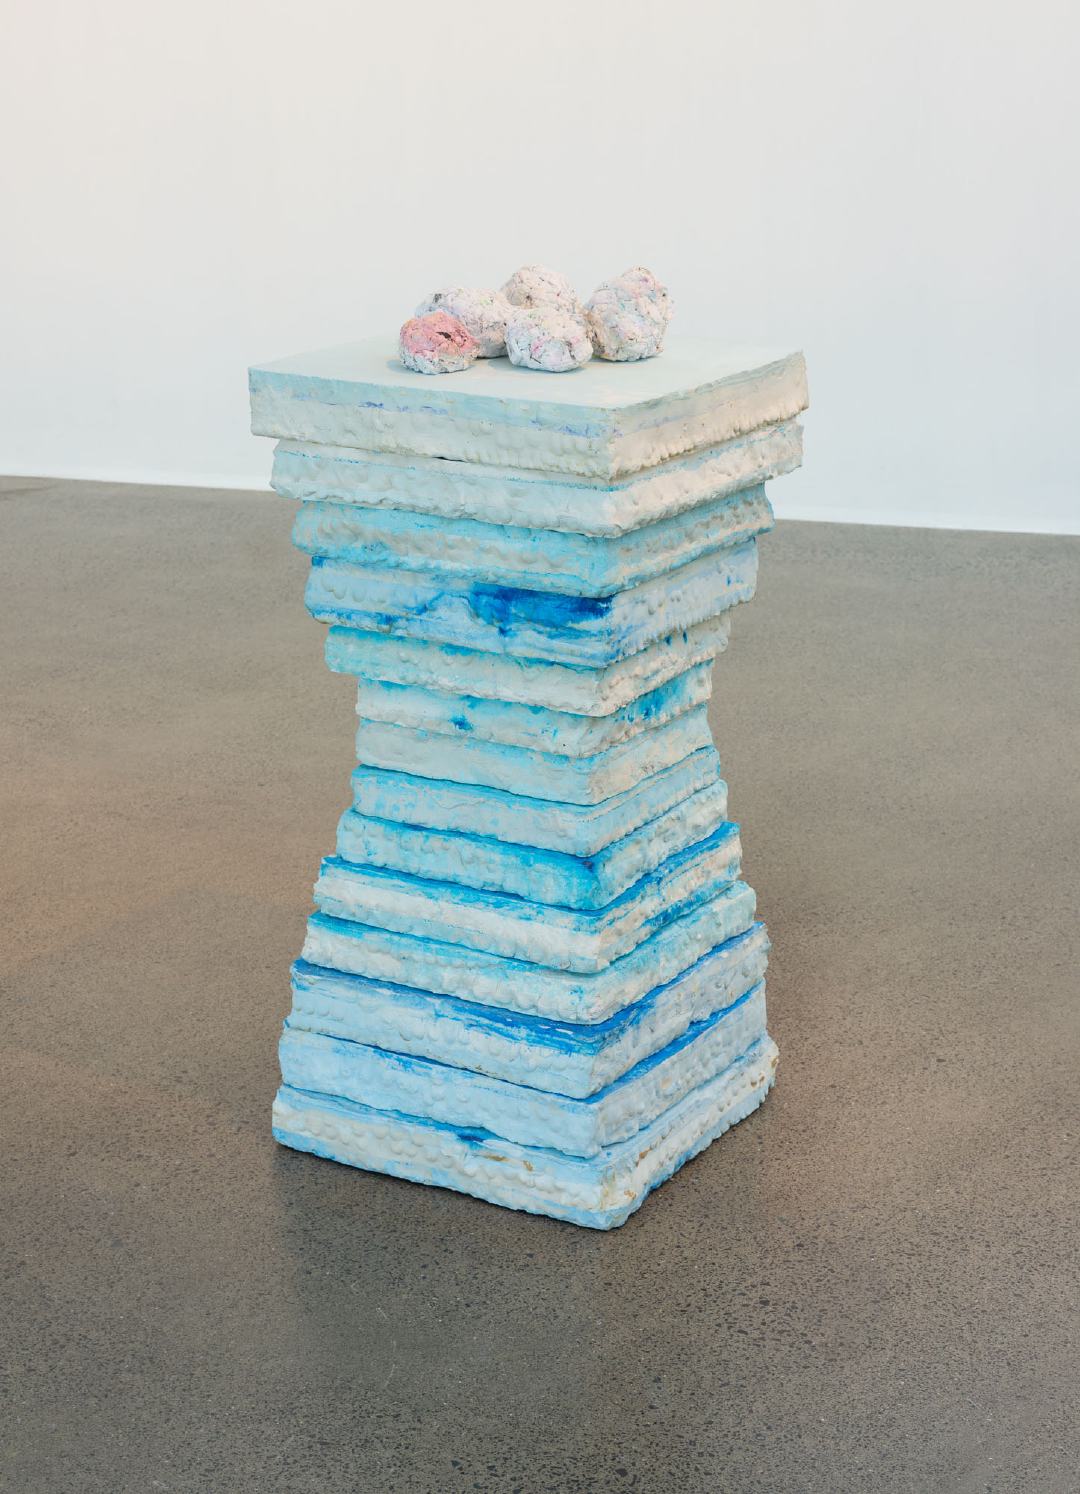 Group therapy, 2020 plaster, pigment and paper mache
880 x 450 x 430mm 